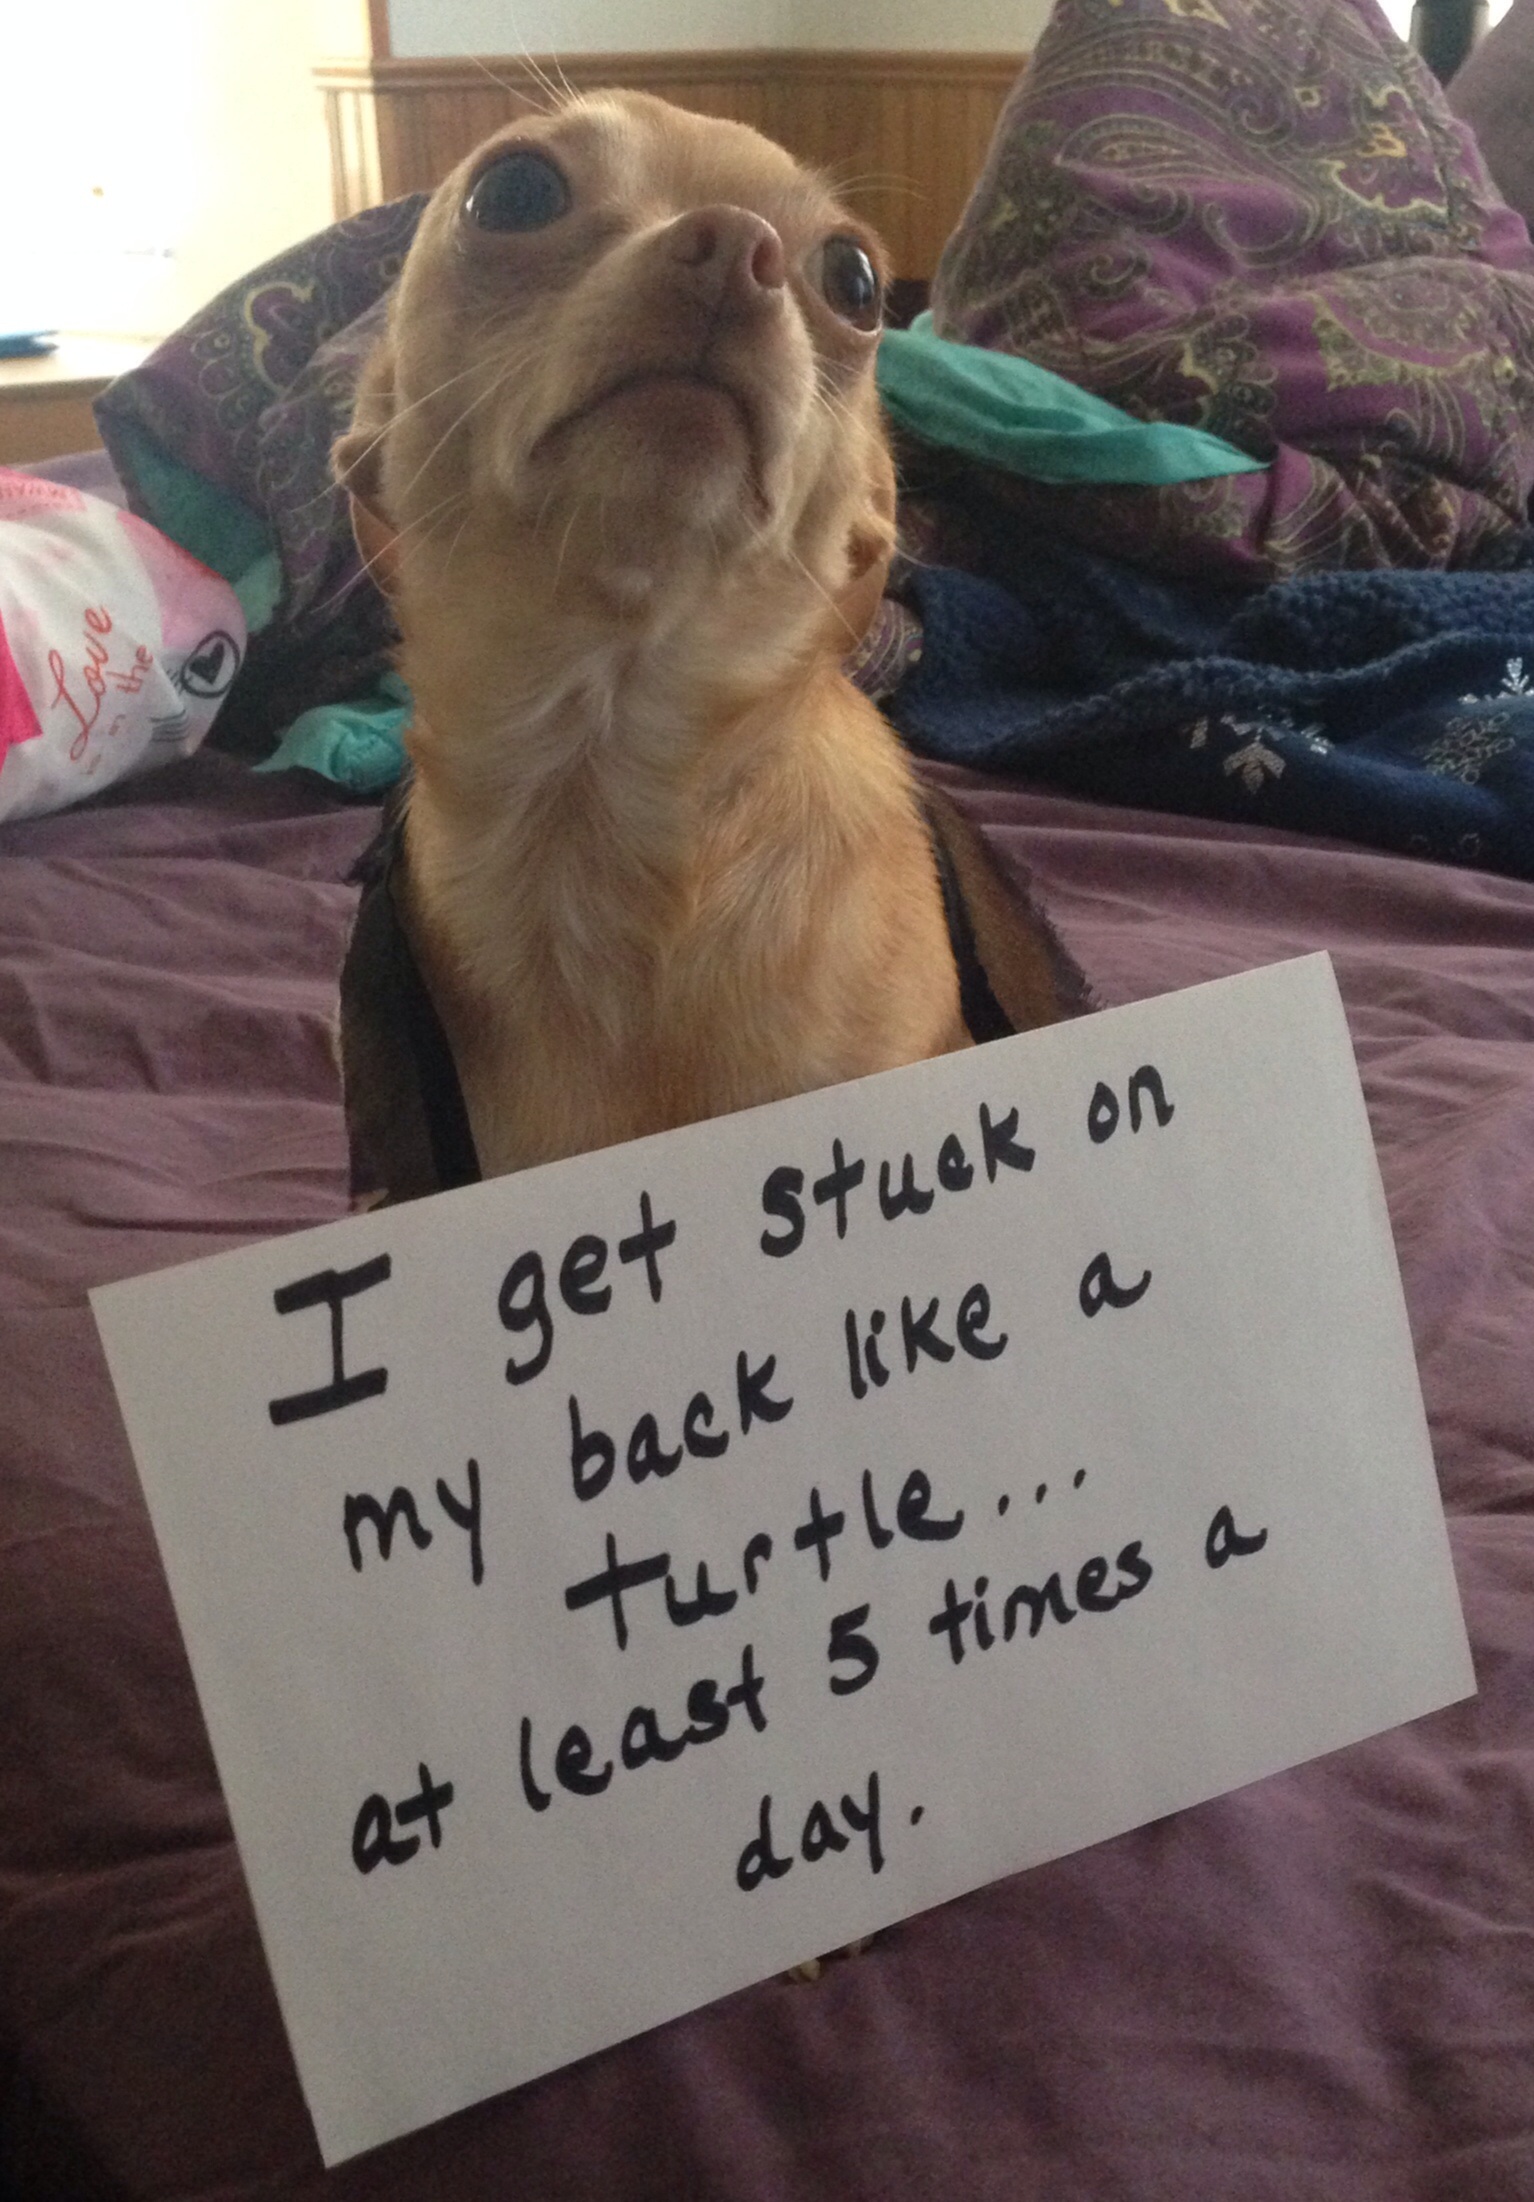 Help! I've Fallen and I Can't get up!! - Dogshaming